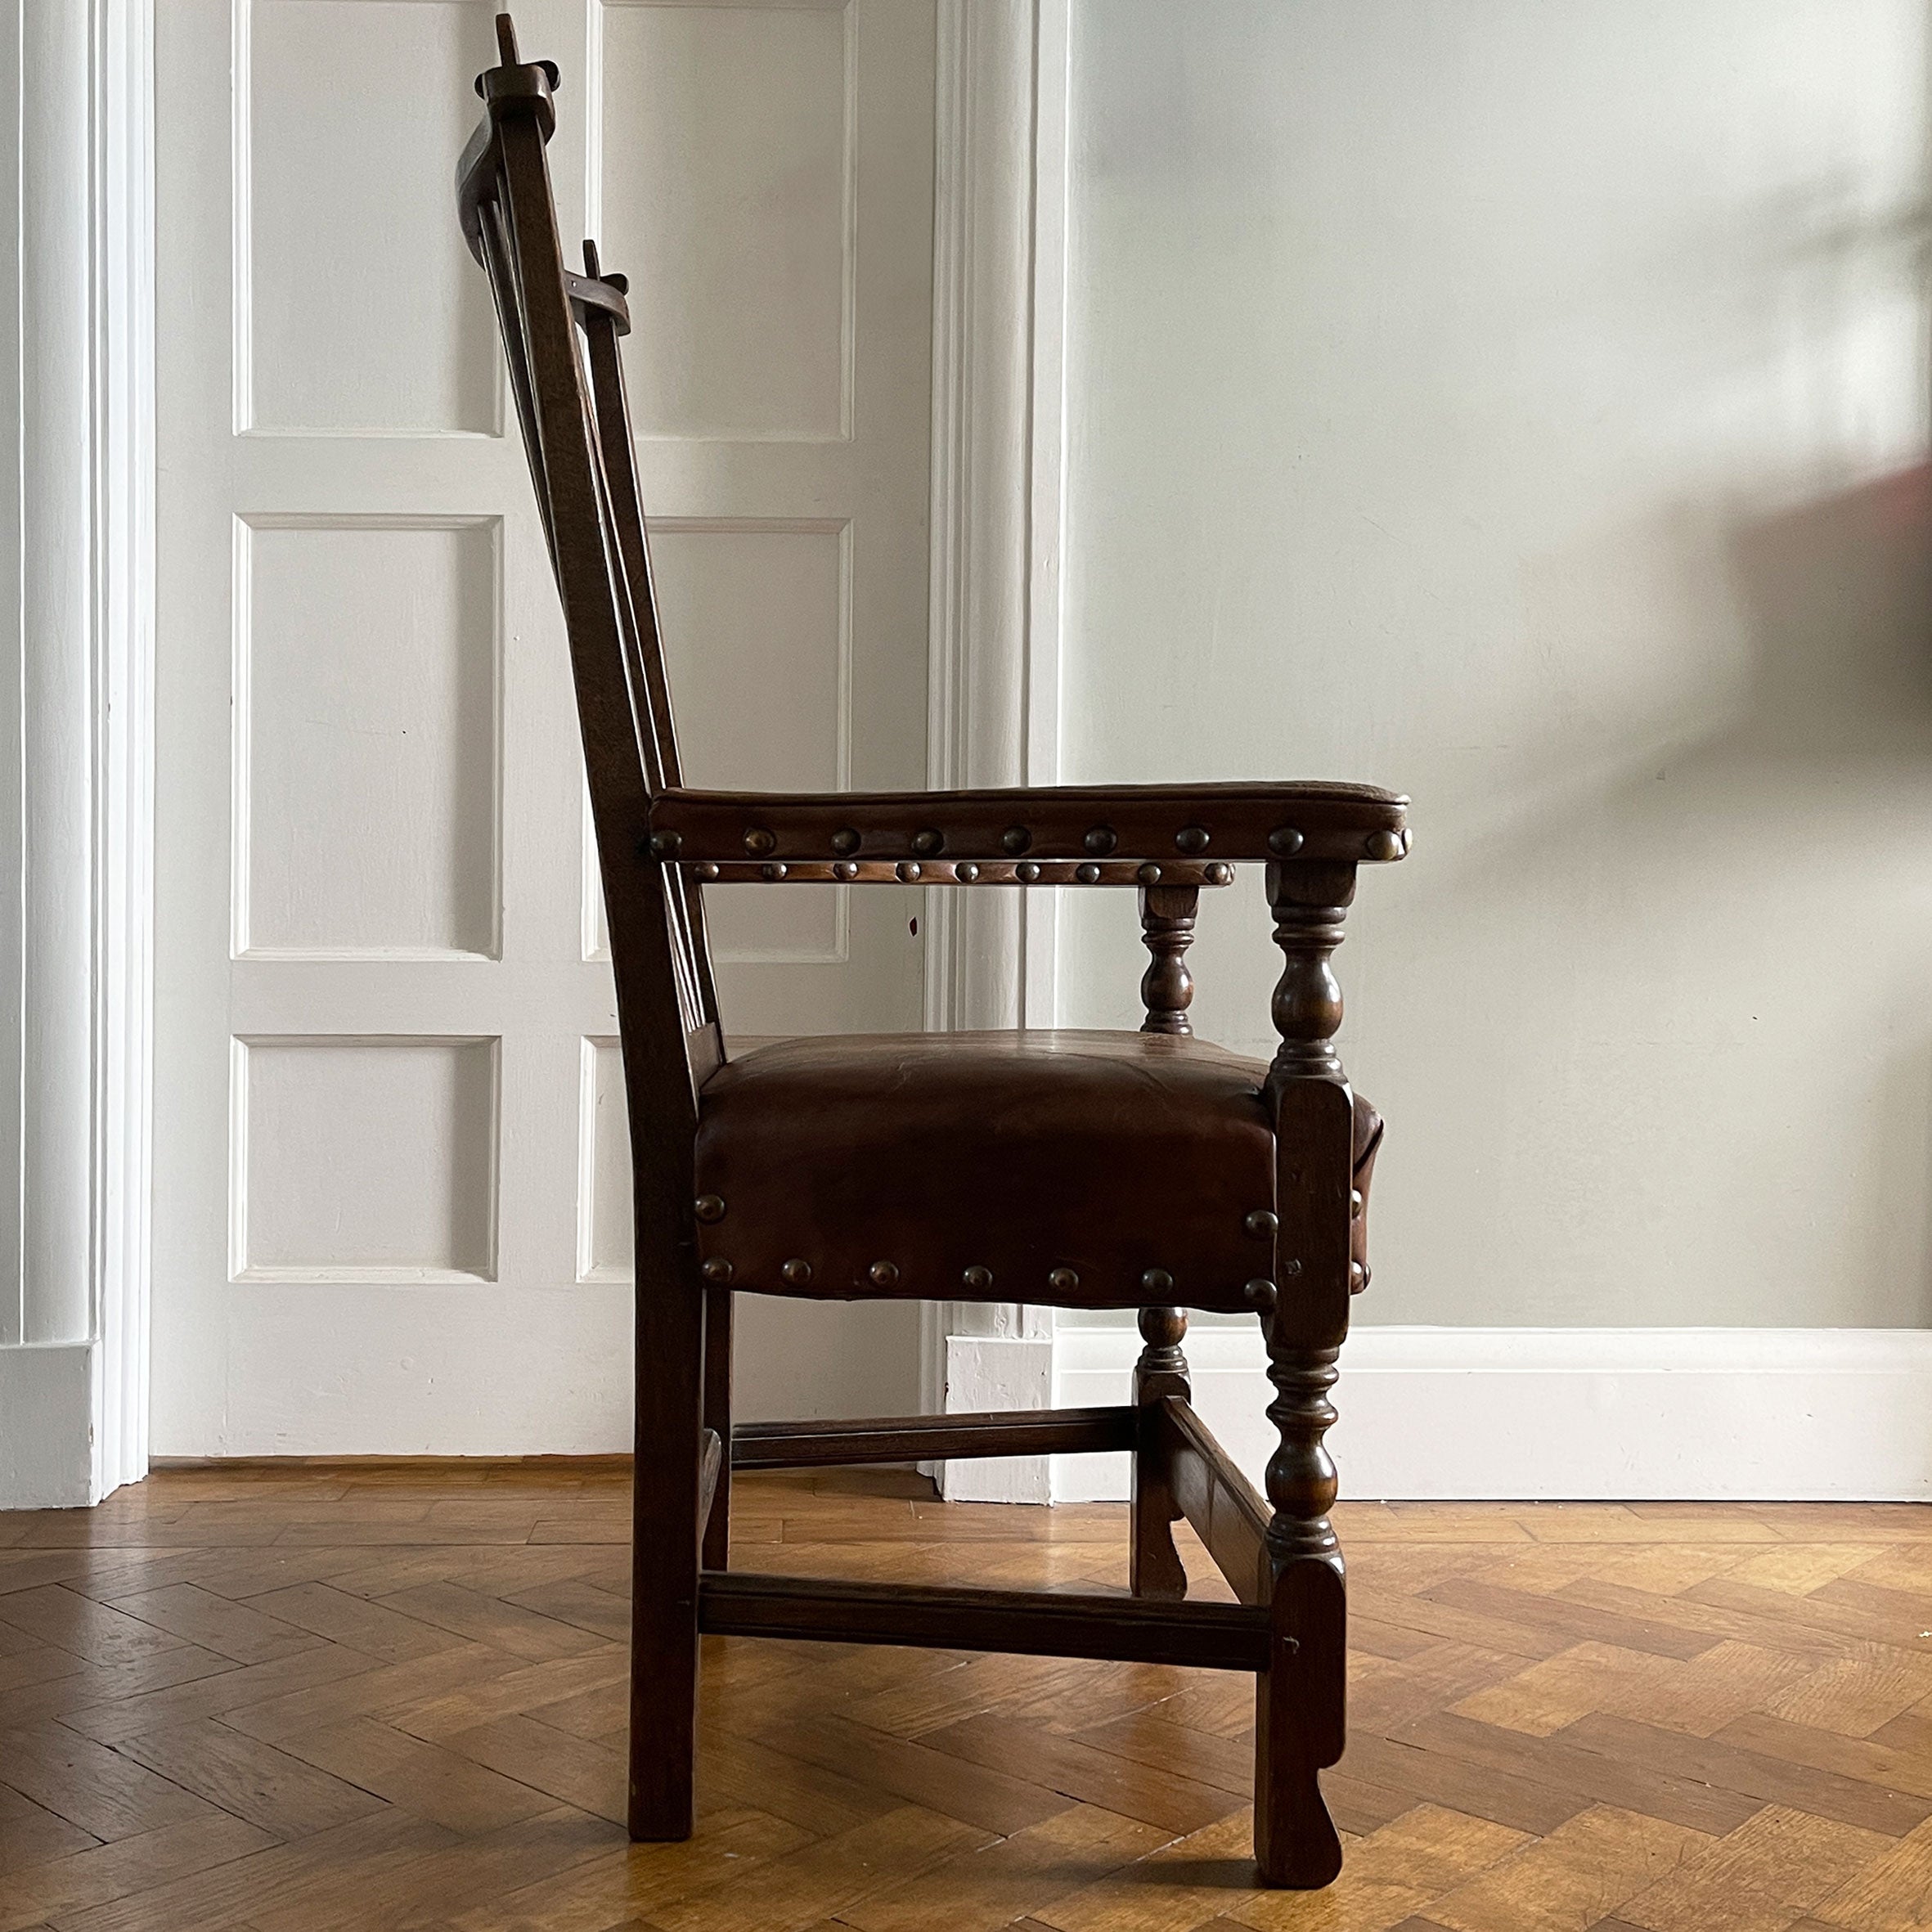 A super solid oak Arts and Crafts styled Carver Chair by the master furniture maker Rupert Griffiths. The style is known as 'Monastic' with this being a Swiss Stick back. The chair has its original leather seat and arms with big old brass studs holding it all in place. The frame is of oak and jointed with oak pegs - SHOP NOW - www.intovintage.co.uk